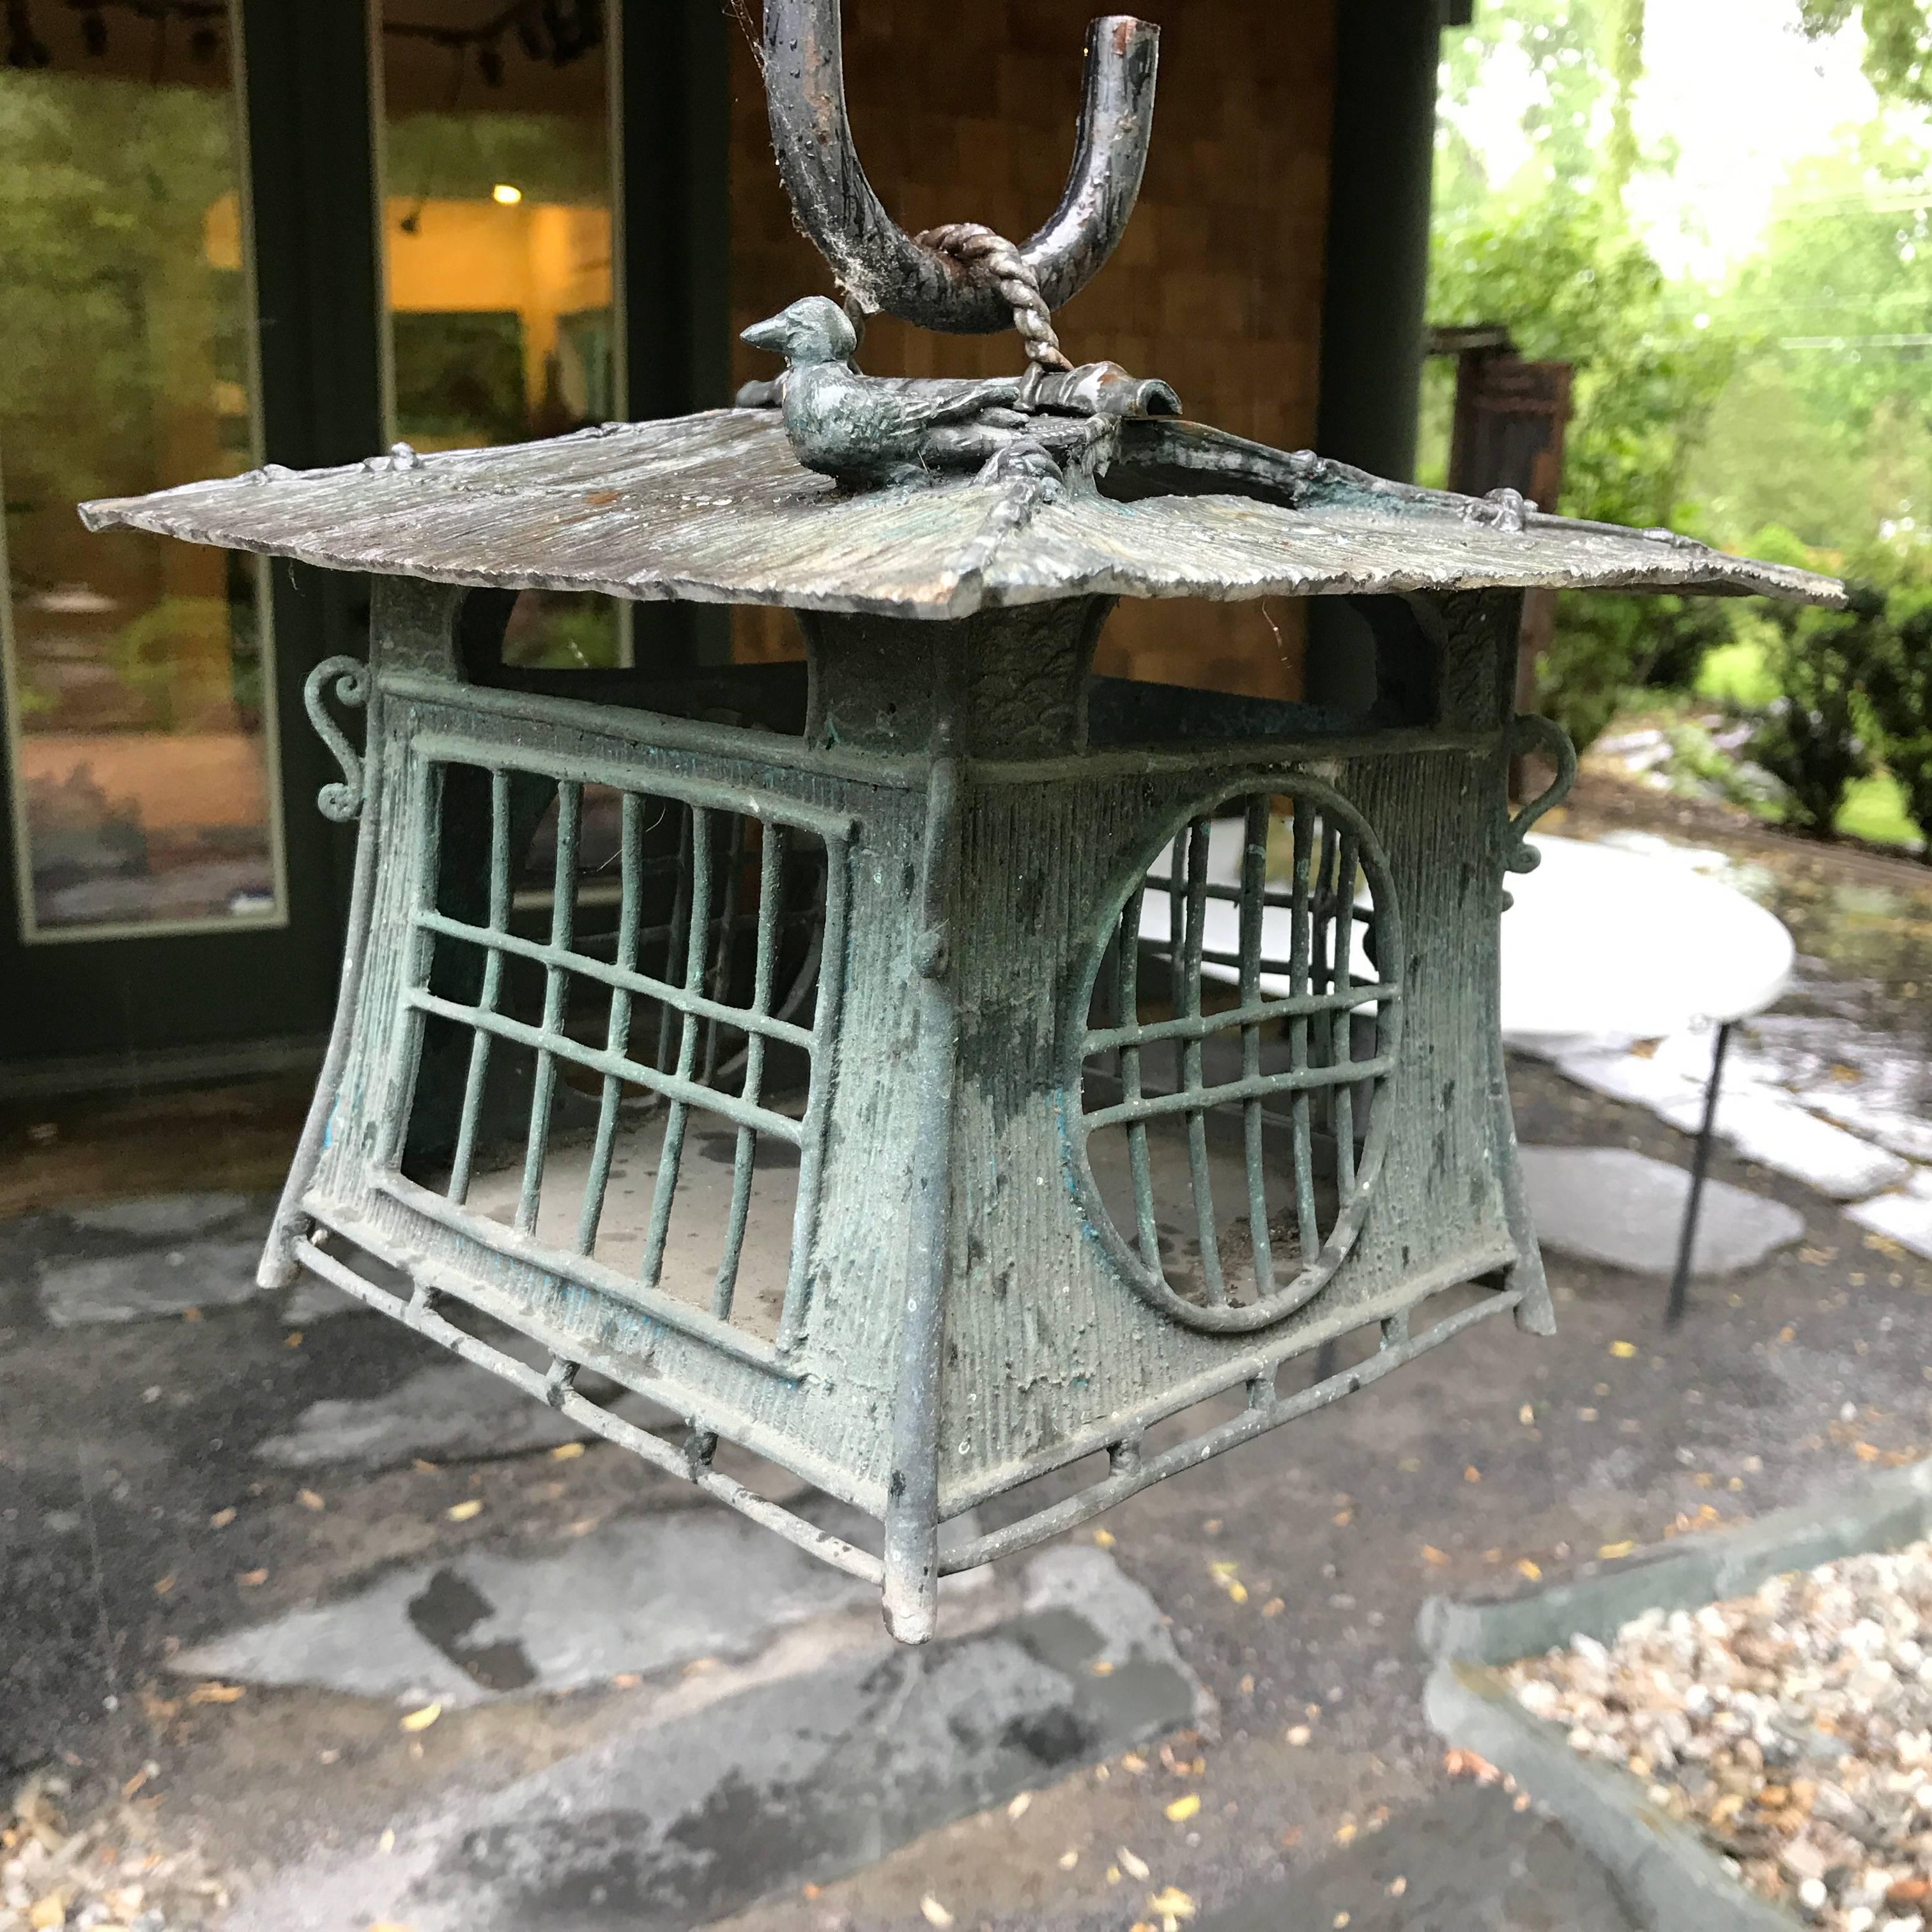 Here's a beautiful and unique way to accent your indoor or outdoor garden space with this treasure from Japan!

This is a bronze casting of a wonderful lantern with a Bird on the Roof design. Door fully operational to insert wax, tea, or oil